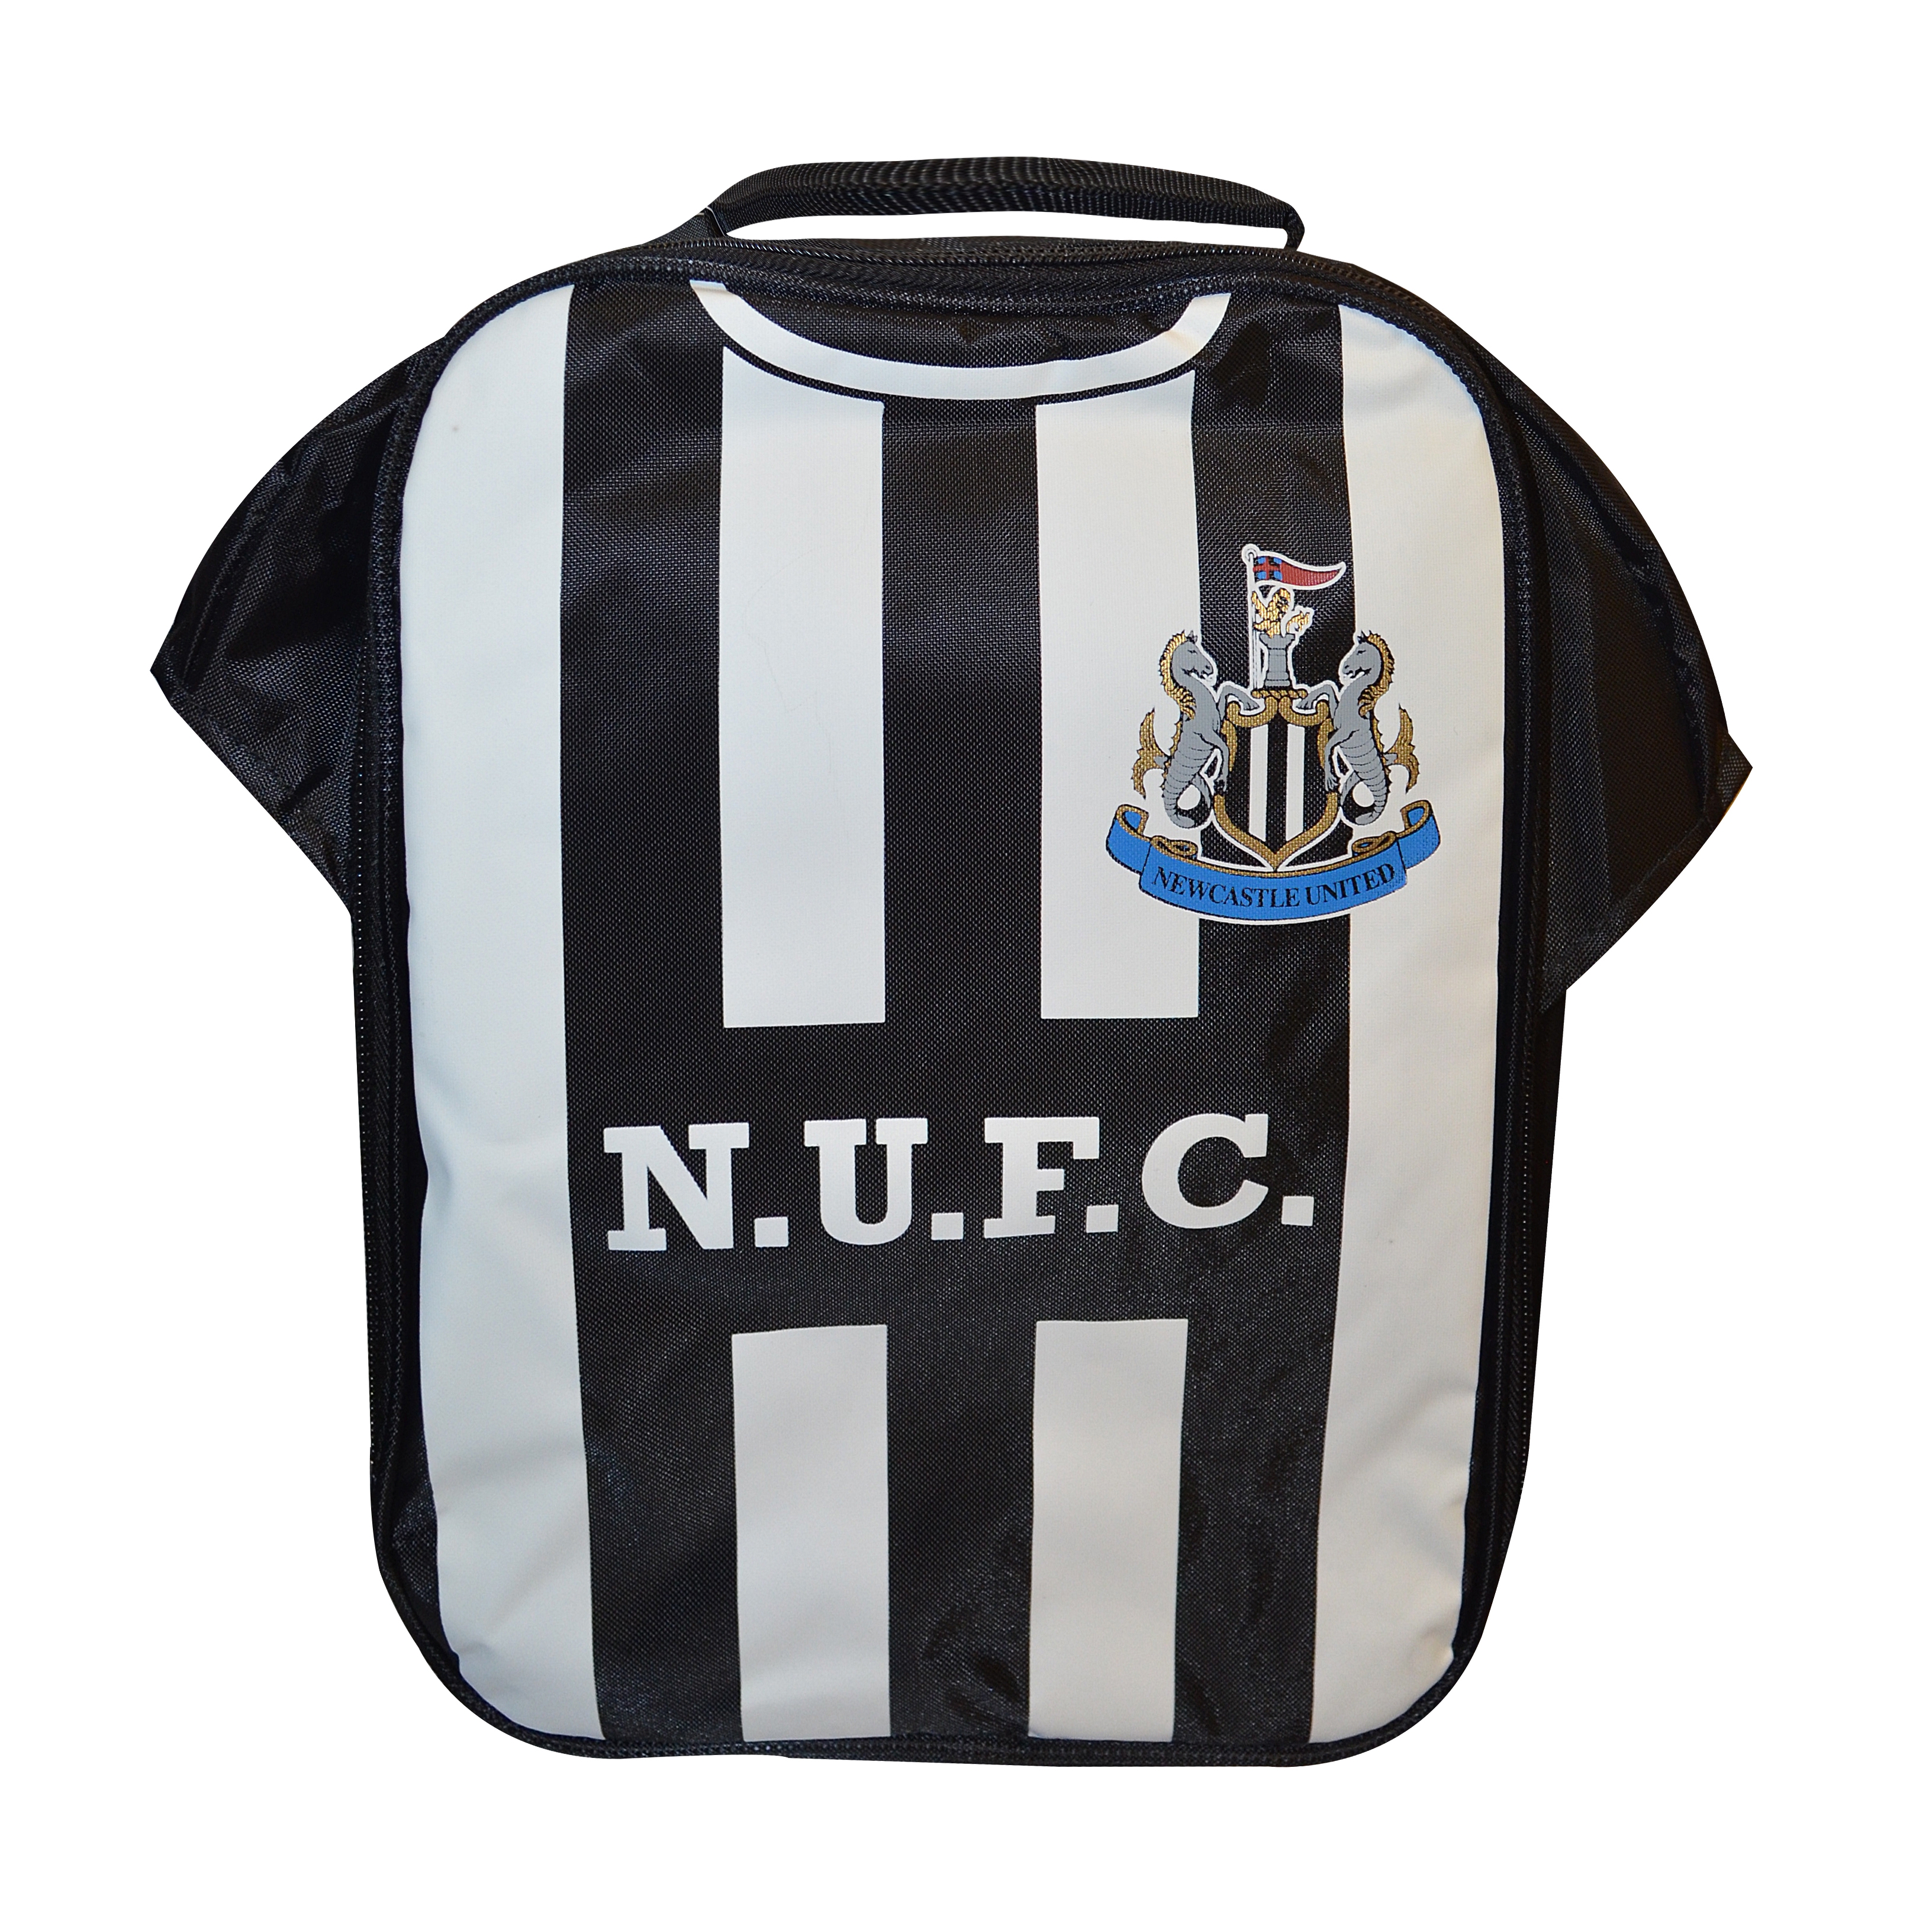 Newcastle United Fc 'Jersey' Lunch Bag Kit Football Premium Official